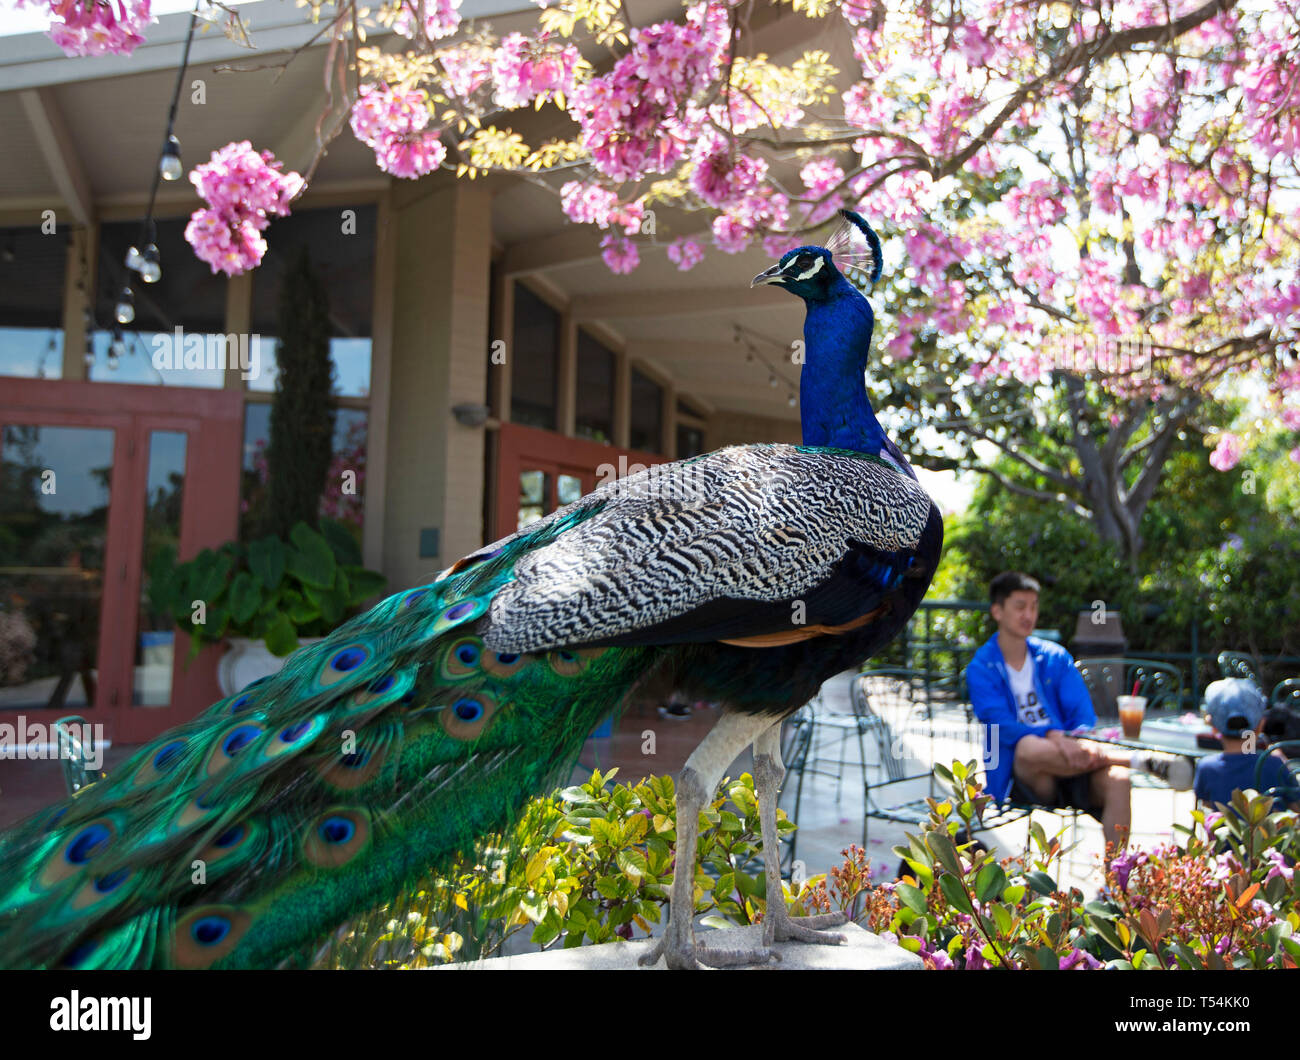 Los Angeles Usa 19th Apr 2019 A Peacock Is Seen At The Gate Of